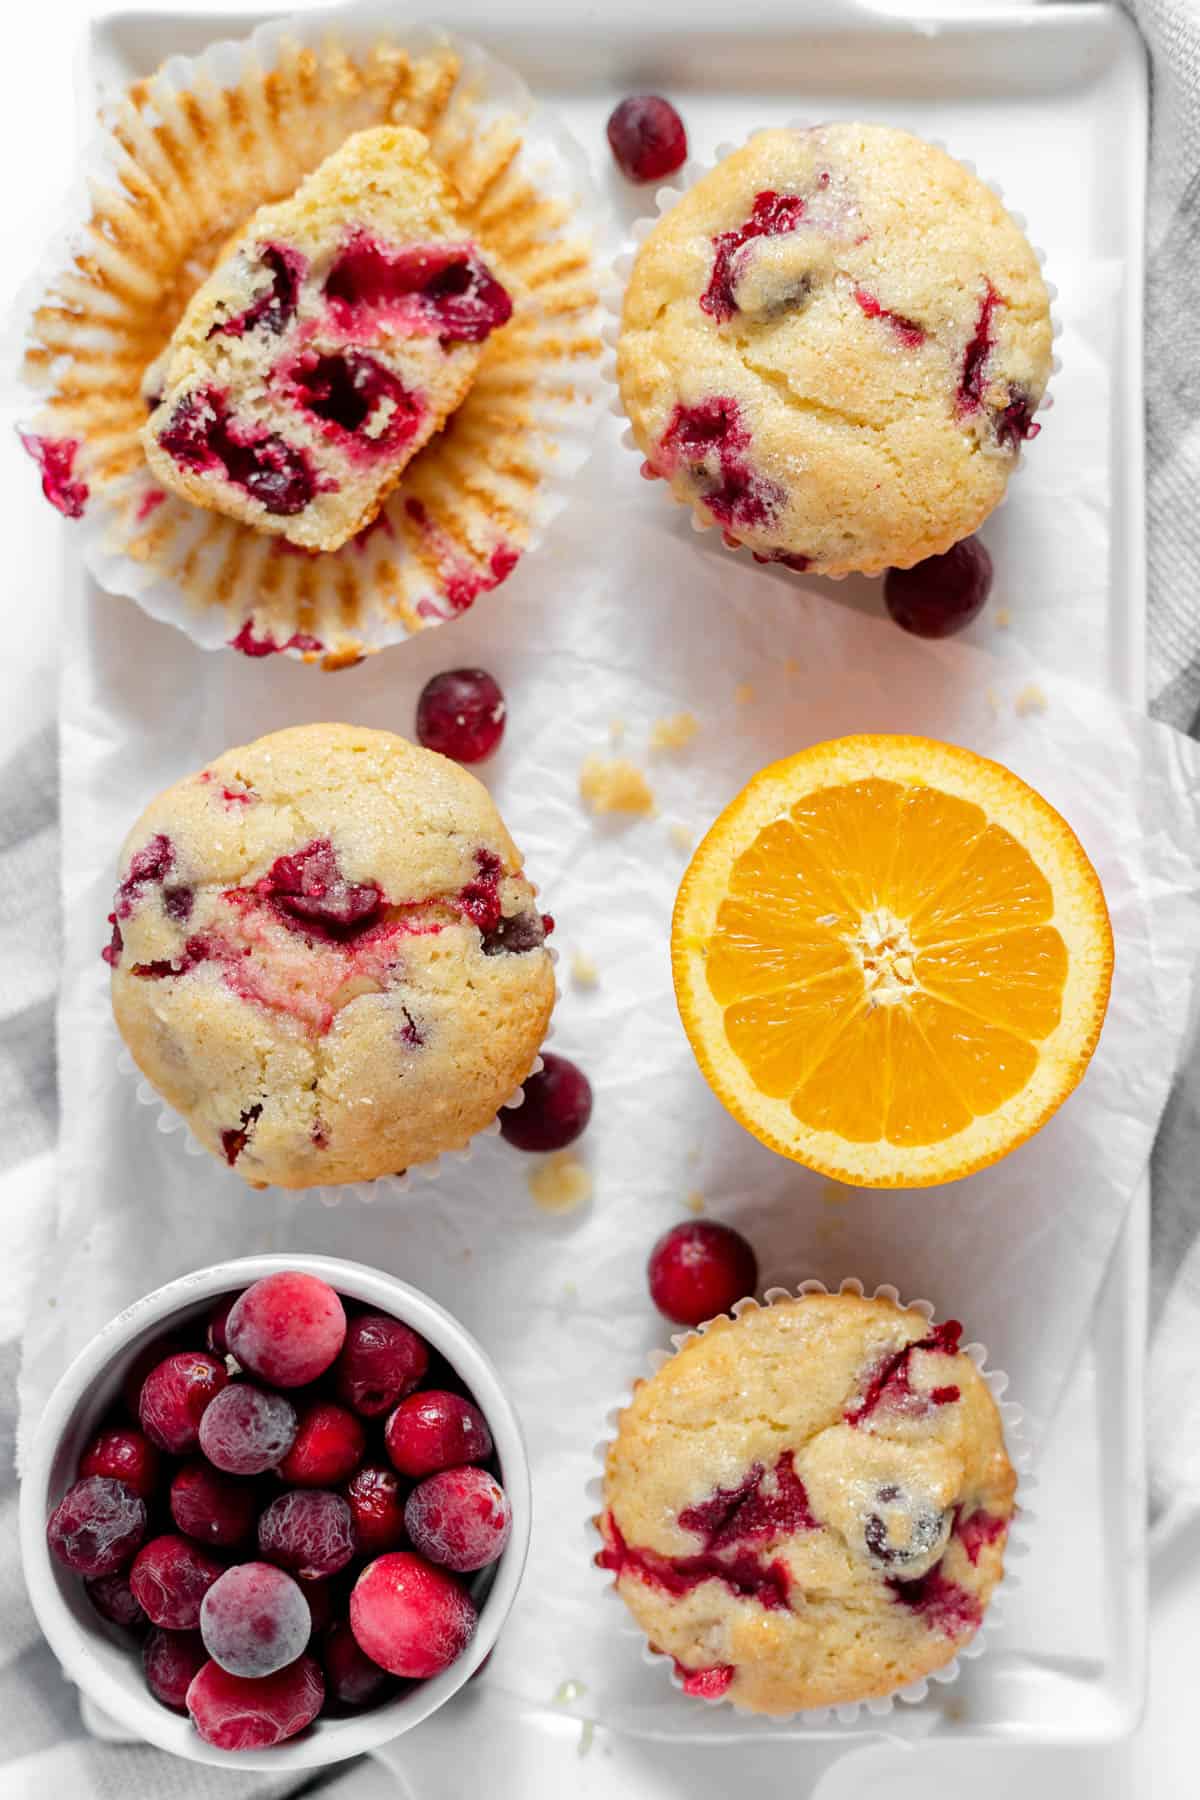 Cranberry orange muffins next to a bowl of cranberries and half an orange.